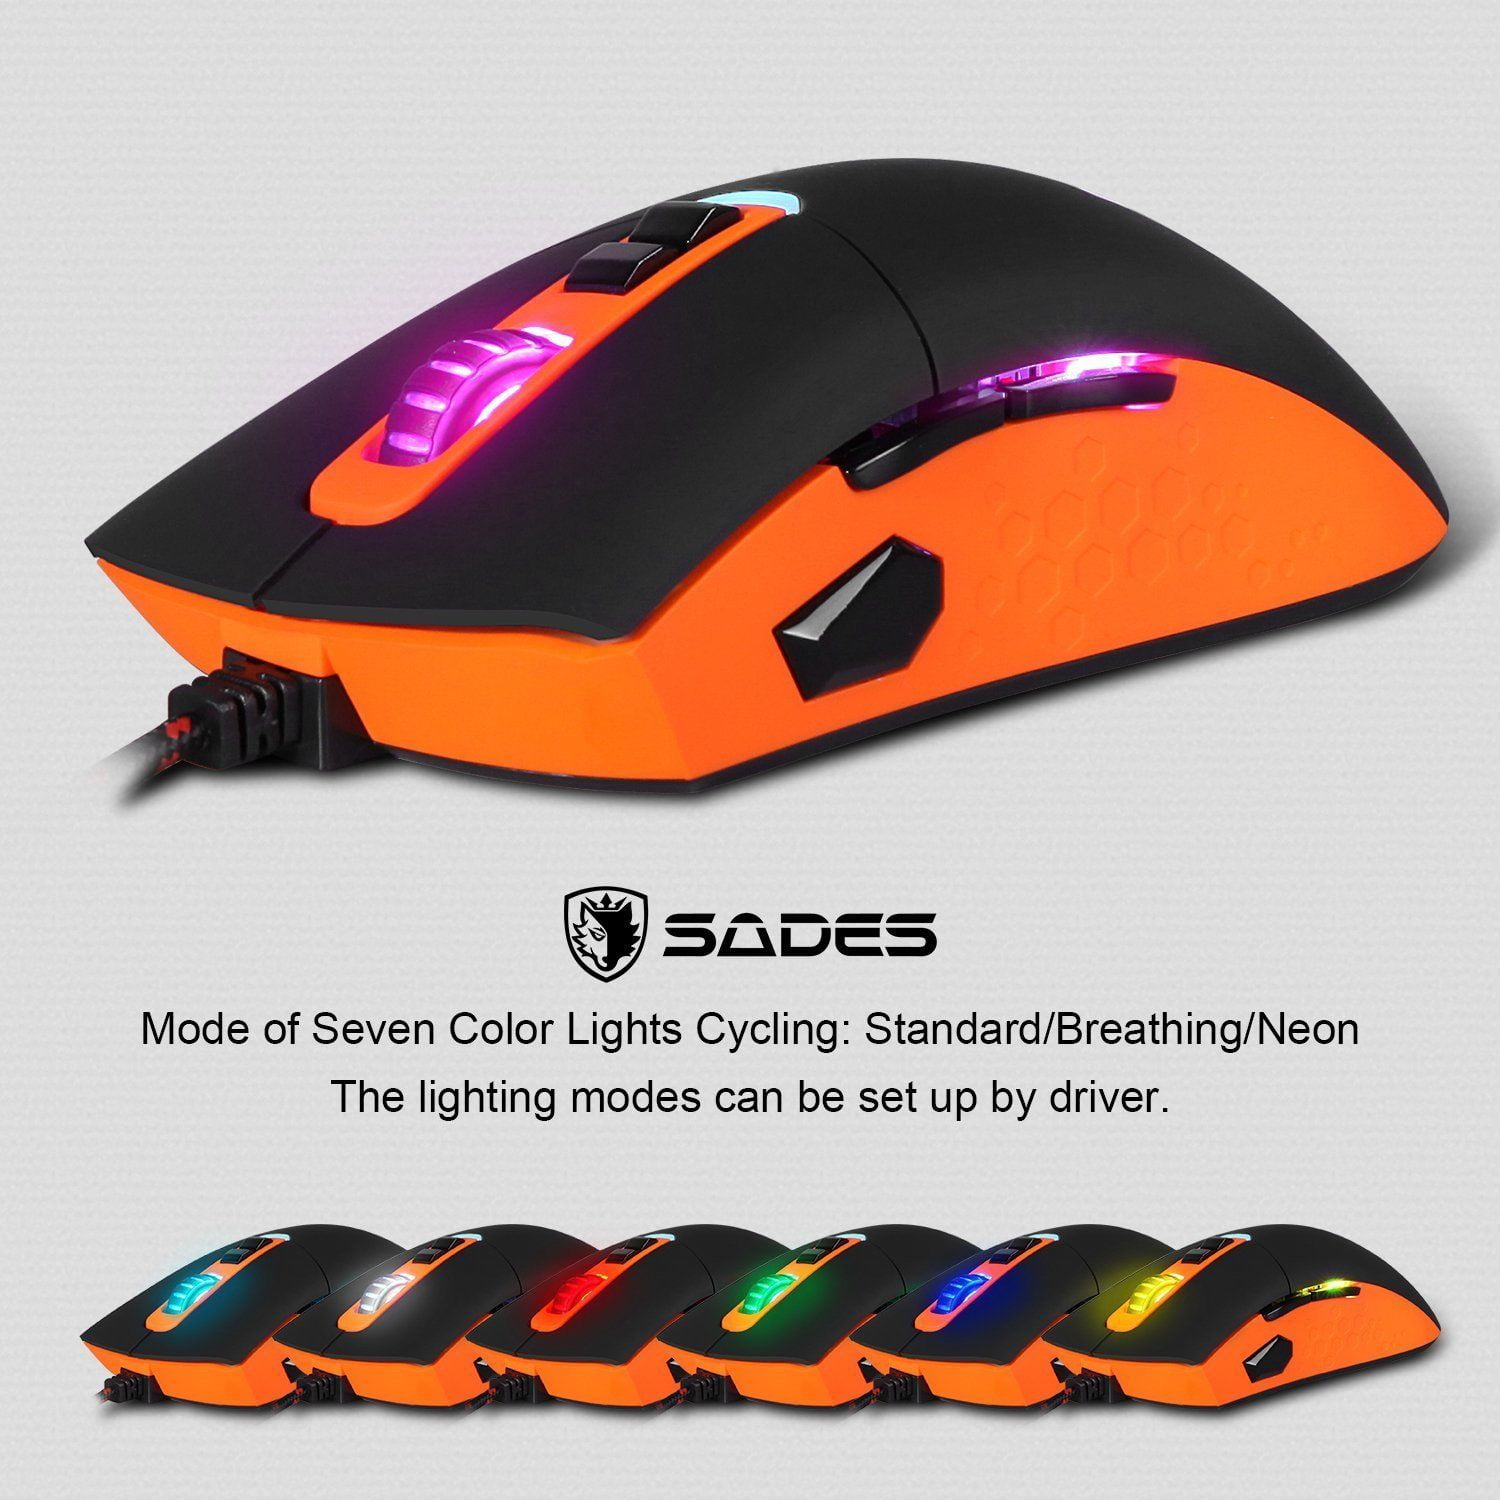 Black Sades S6 Cataclysm USB PC Gaming Mouse with LED Lights